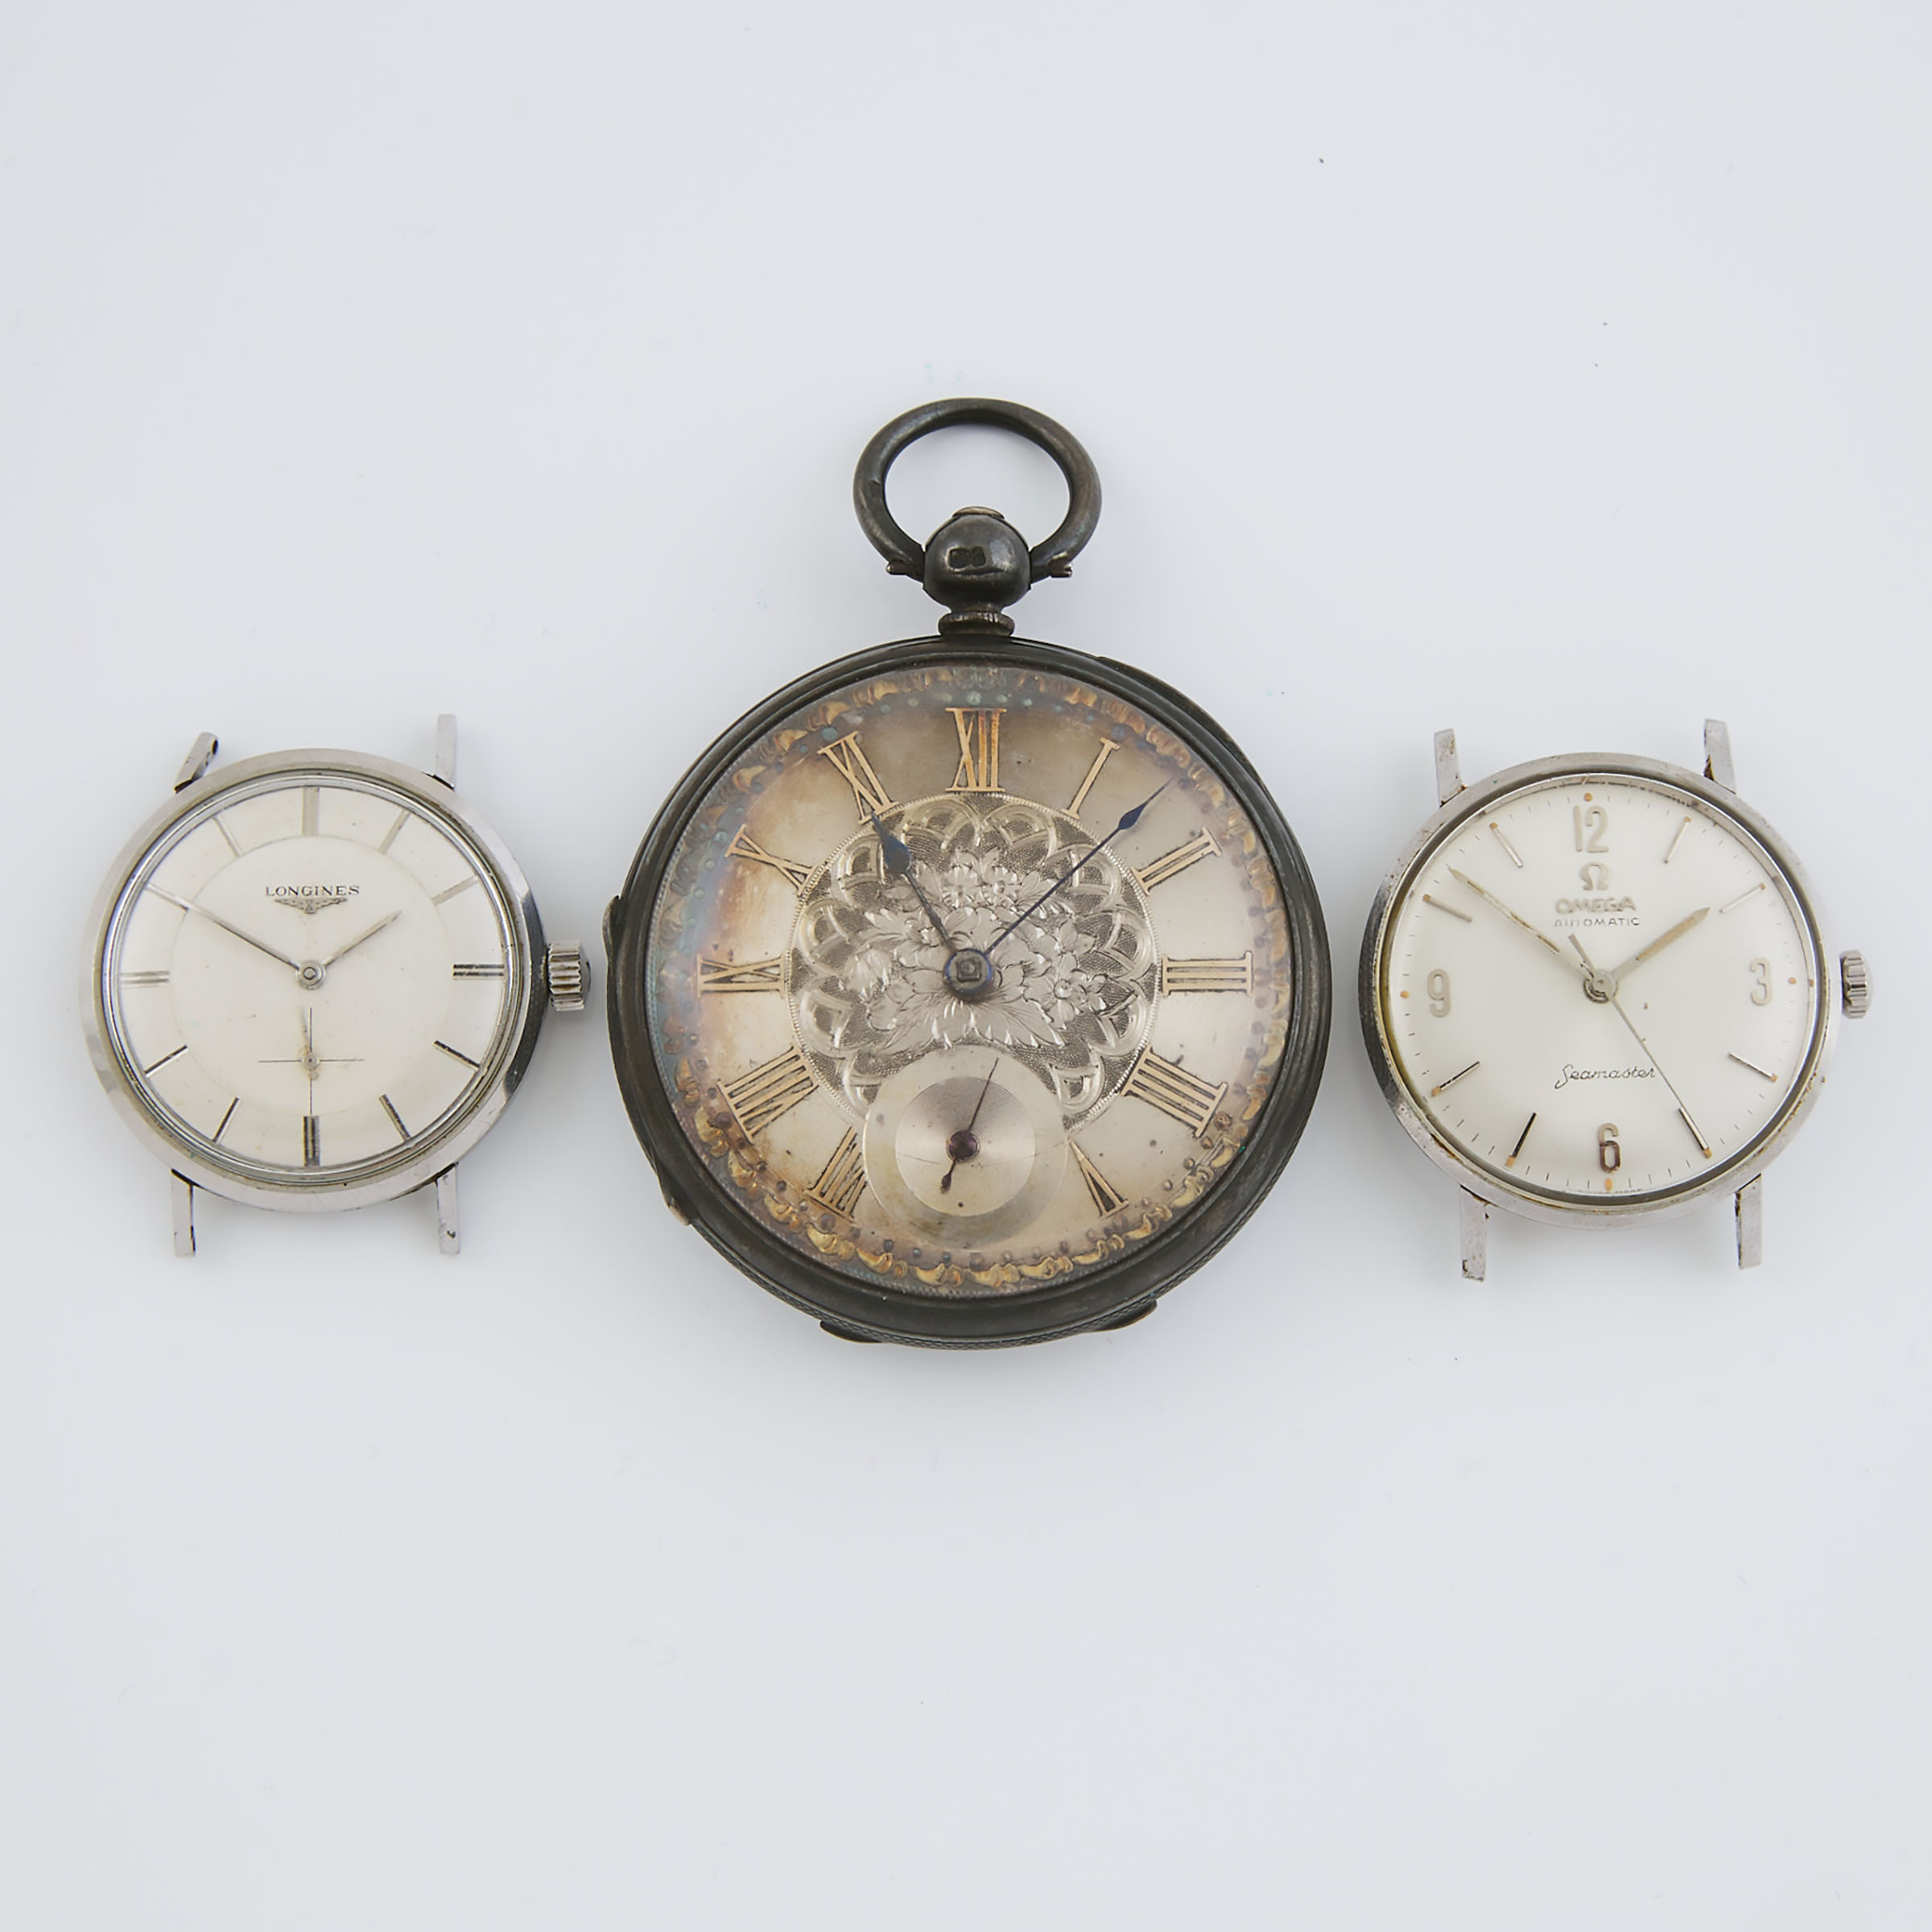 Two Wristwatches And A Pocket Watch